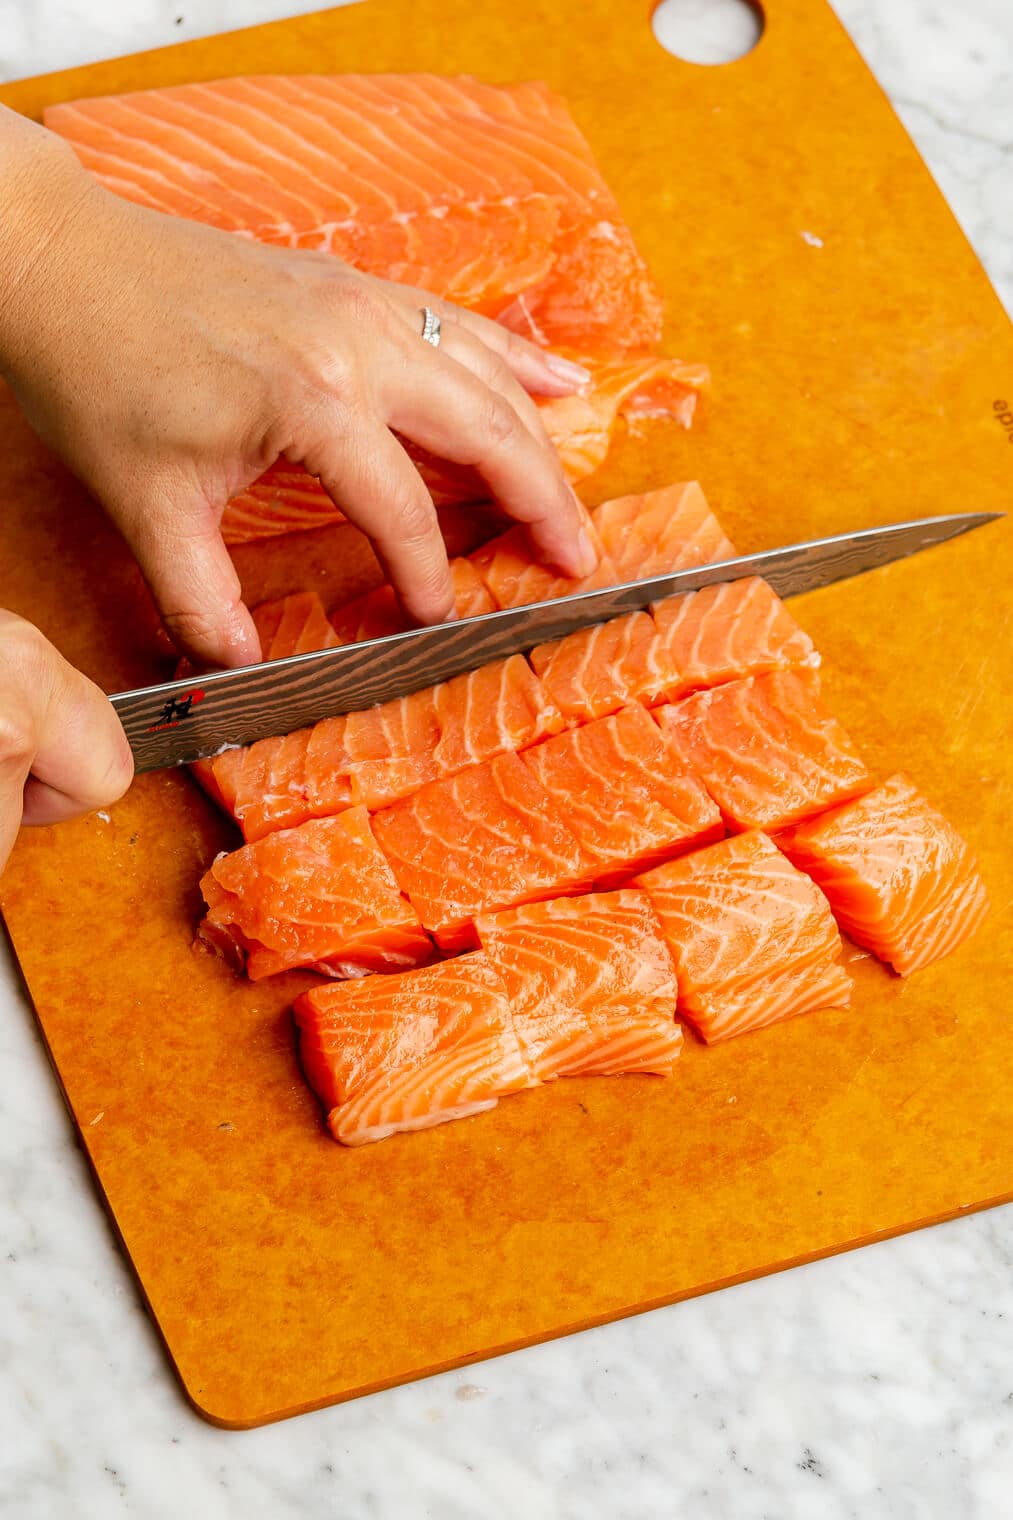 A salmon filet being cut into cubes on an orange cutting board.